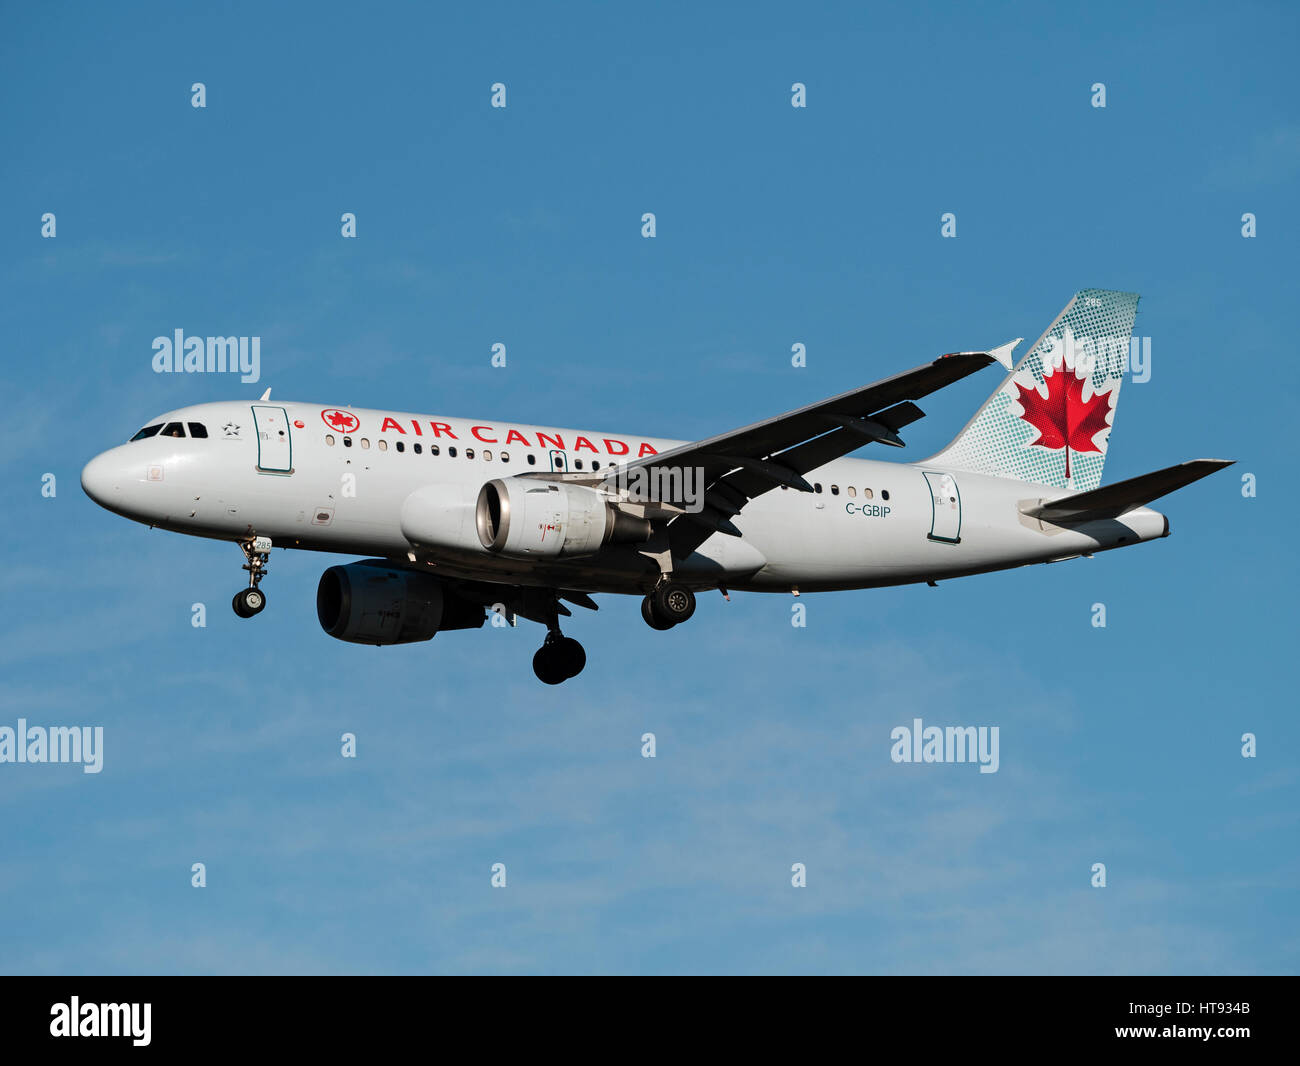 Air Canada plane Airbus A319 (C-GBIP) airborne final approach for landing Stock Photo